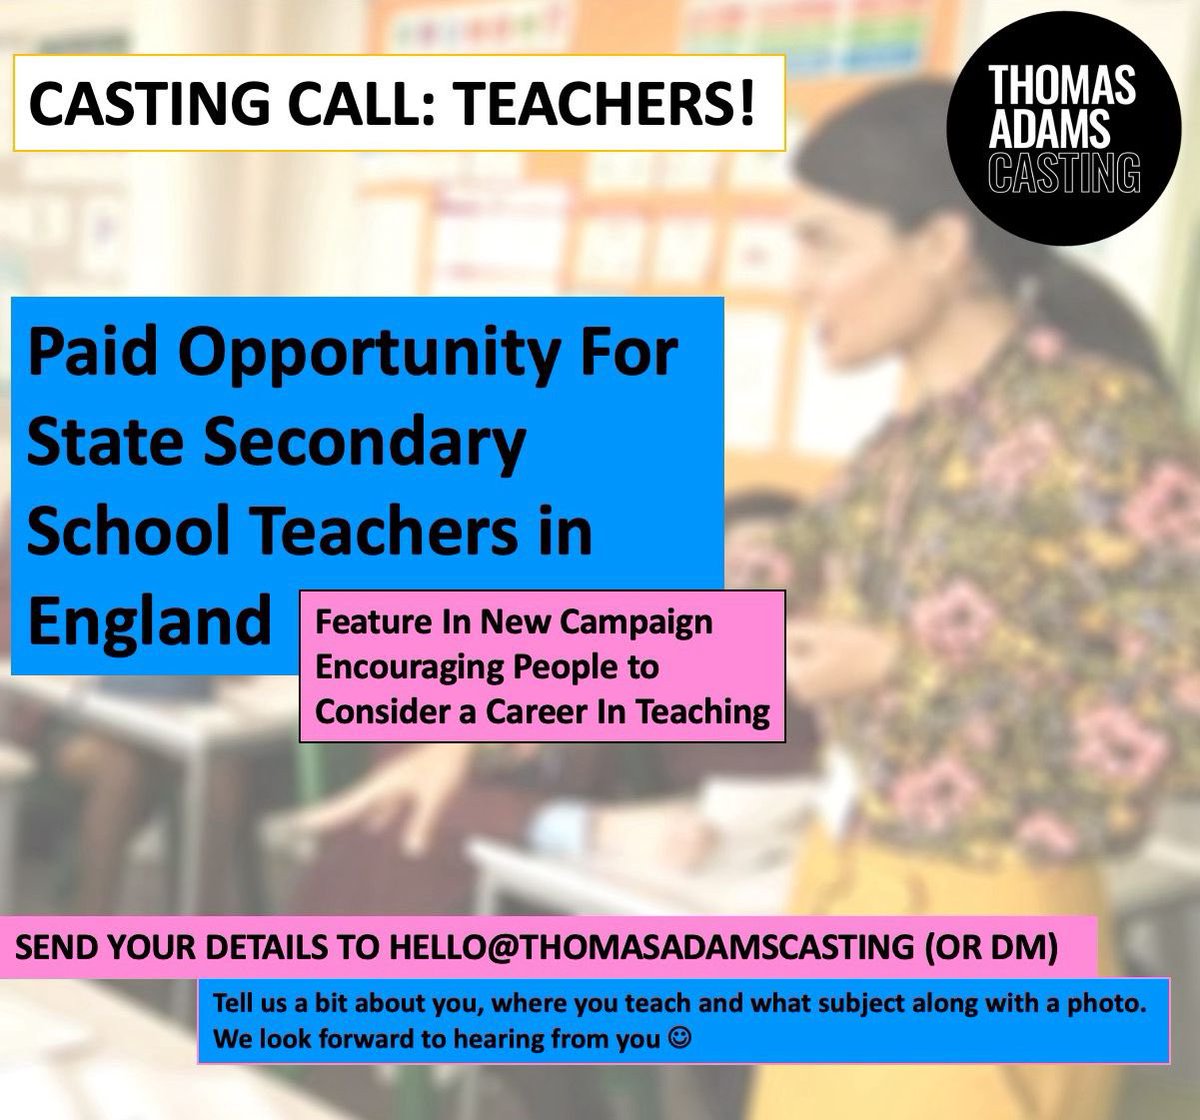 Calling all Teachers!  We are searching for amazing secondary school teachers for an exciting upcoming project.   #teachers #teaching #ukteachers #secondaryschool #GetIntoTeaching #teachersofinstagram #teachersfollowteachers #teacherlife #teachergram #teachertribe #teacheruk